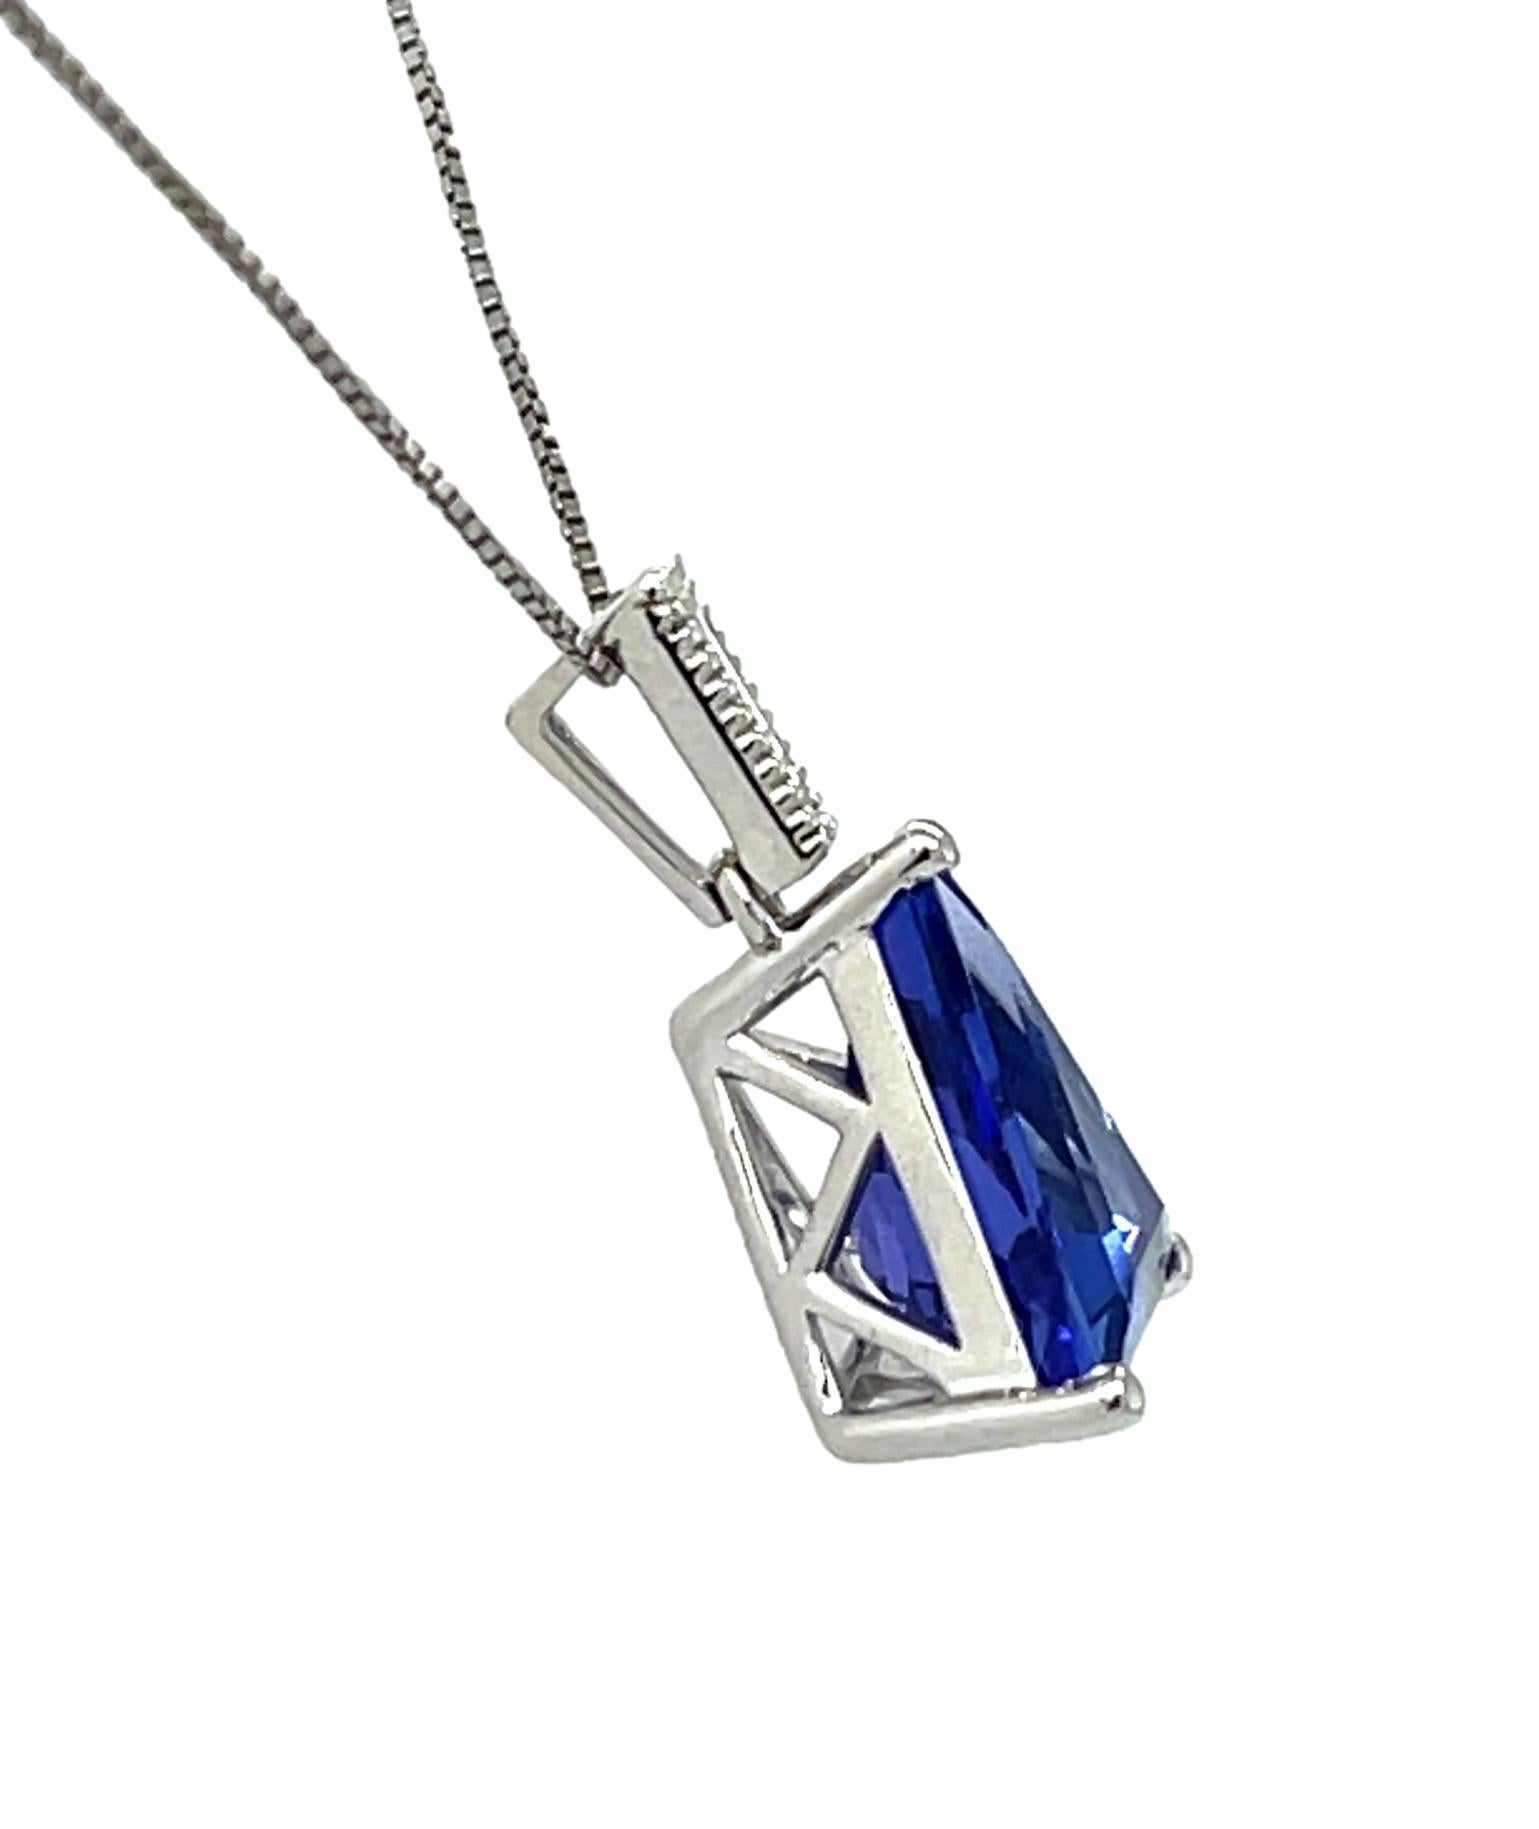 This stunning fancy cut trillion AAA quality Tanzanite pendant has a special cut elongated tapered baguette diamond on top. Comes with a gold chain. It comes in a beautiful box ready for the perfect gift!

18KW: 1.60 gms
Tanz wt: 3.36 cts
Tanz